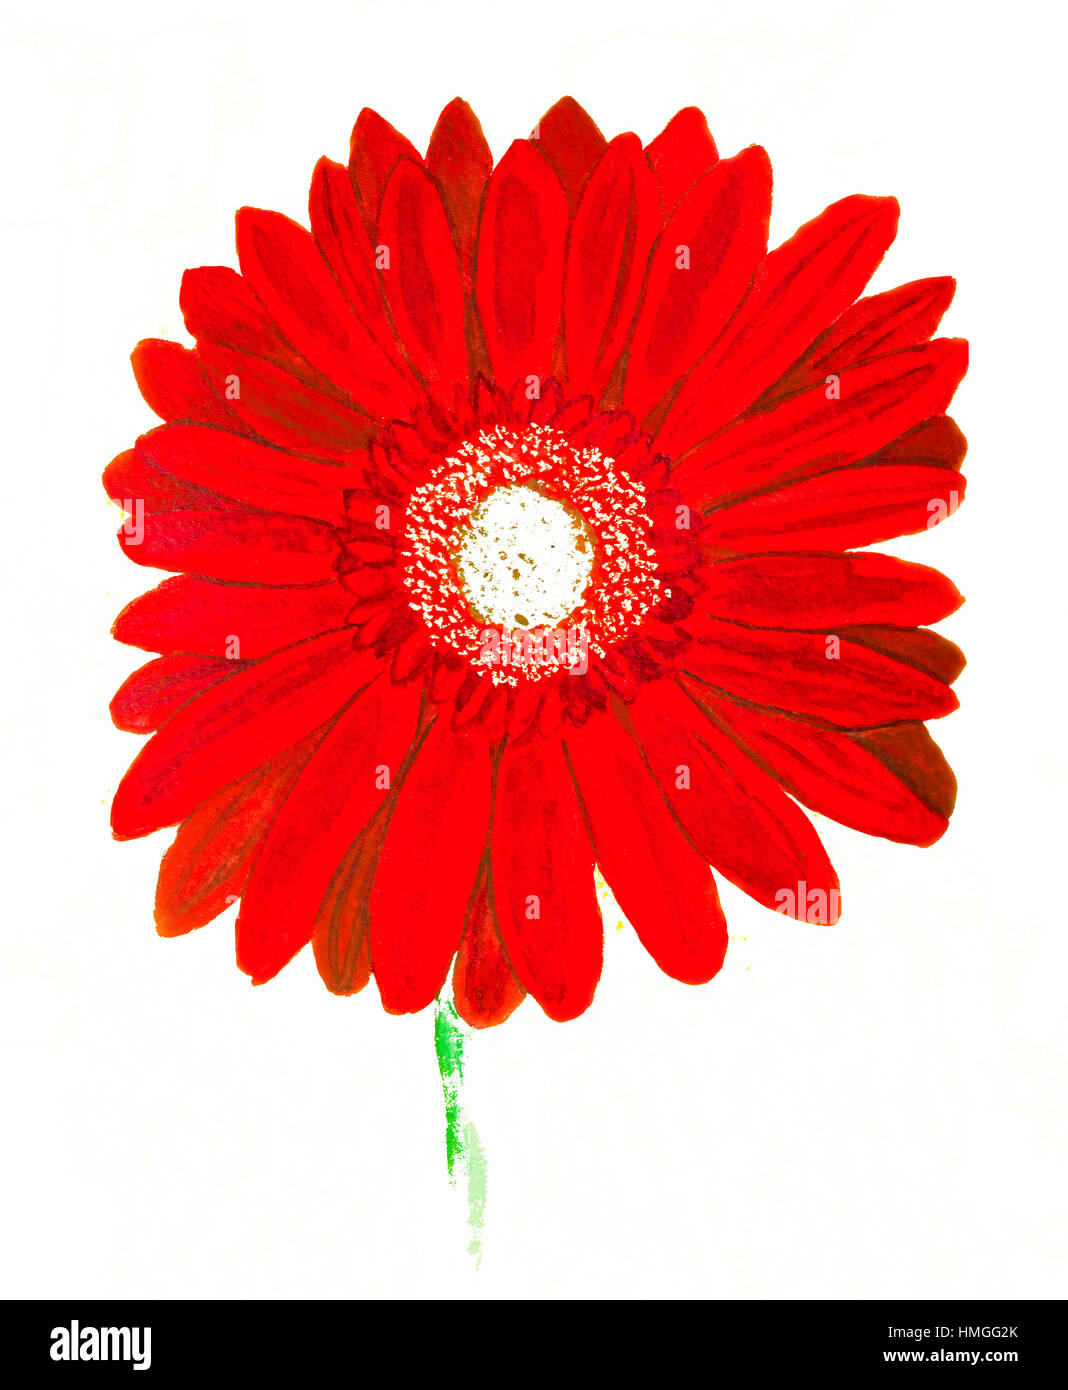 Red gerbera flower on whie background, watercolor painting. Stock Photo